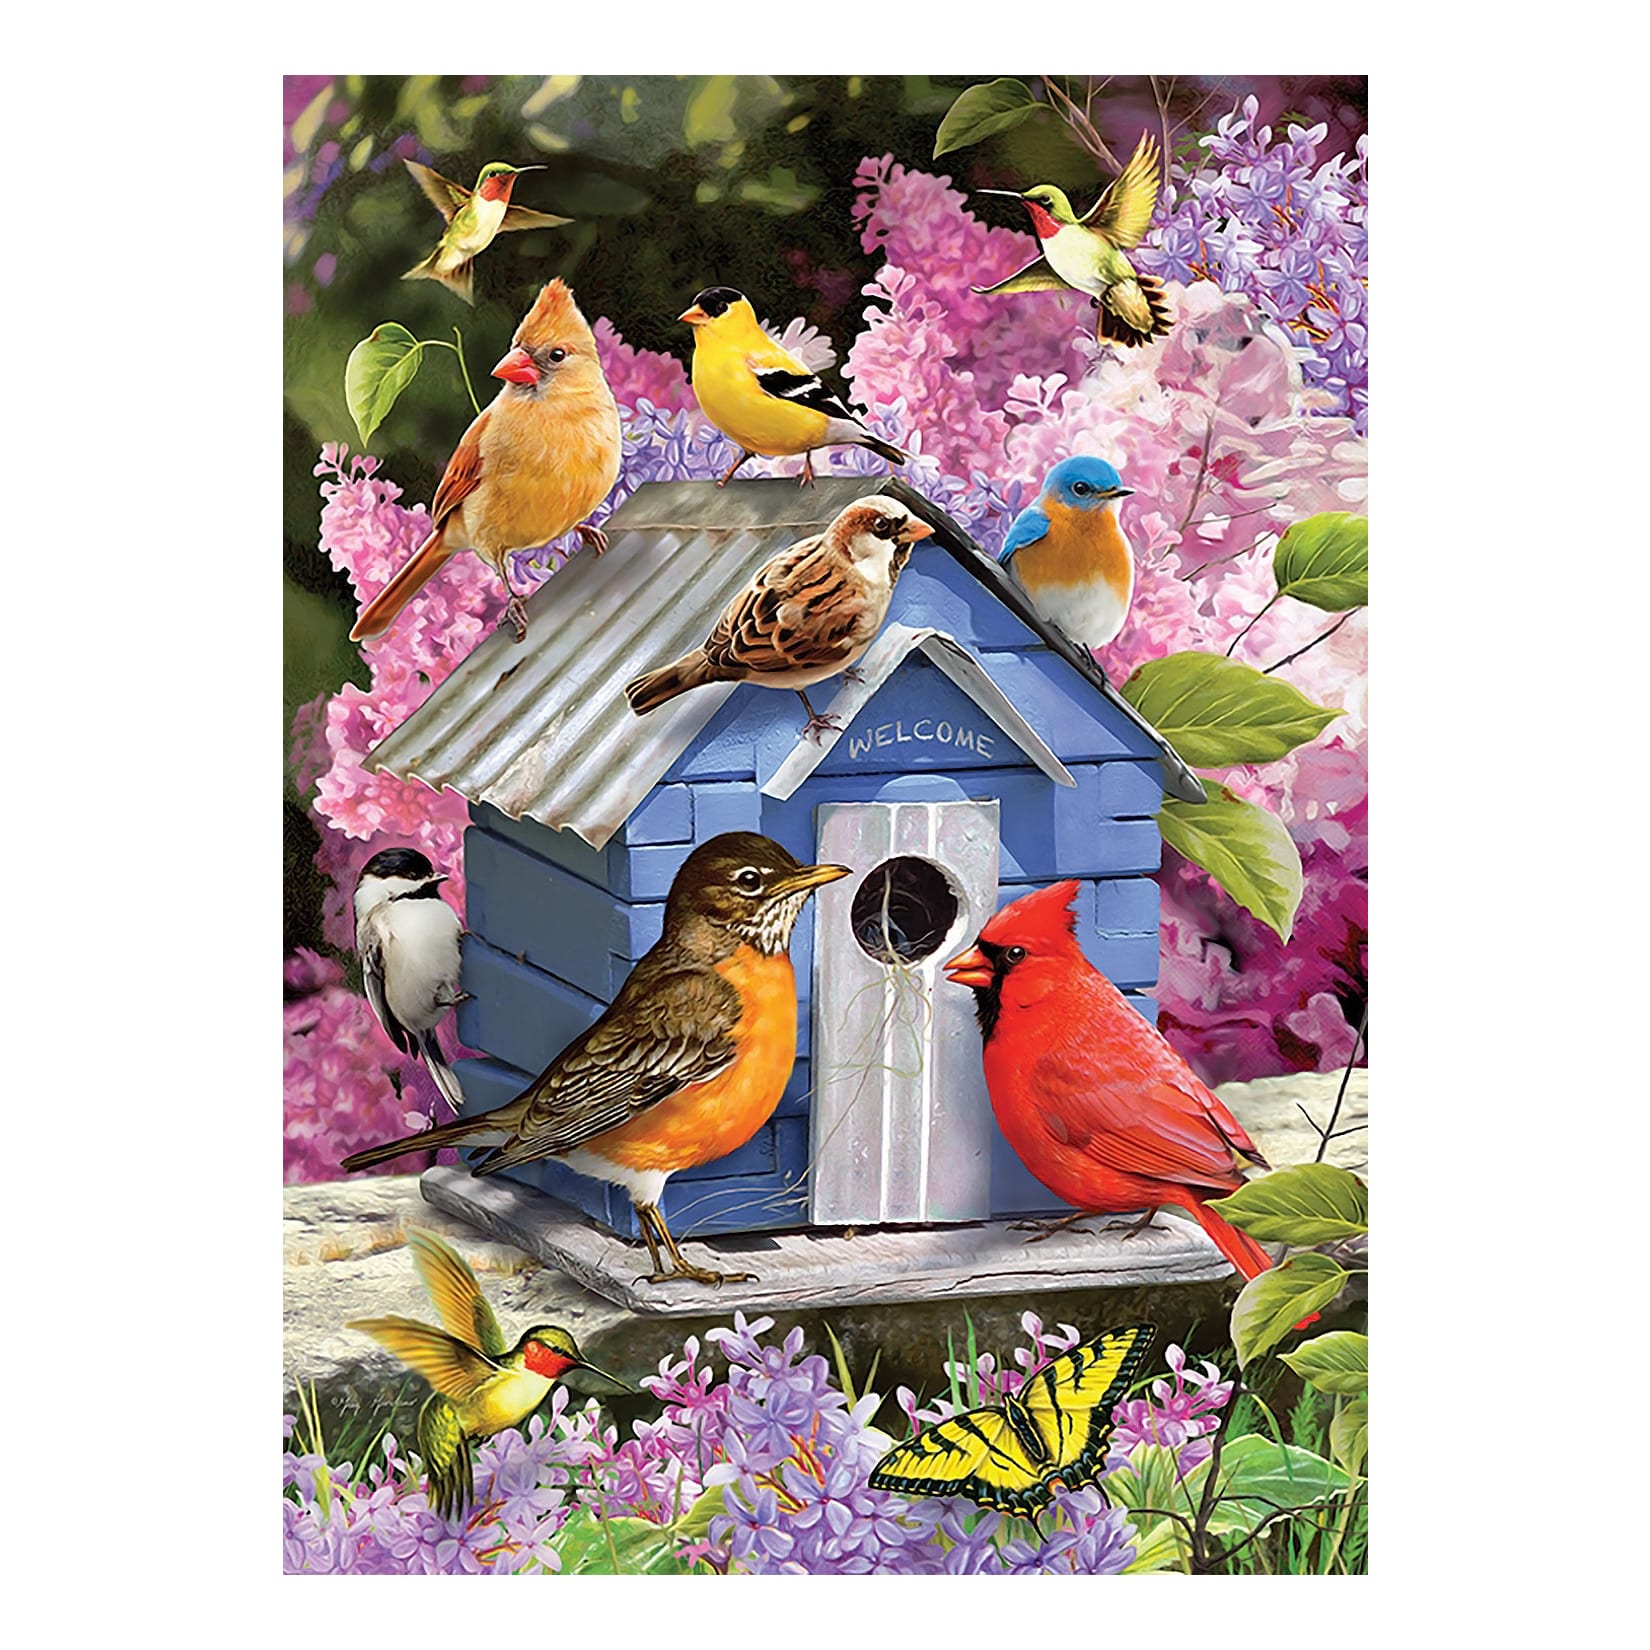 Cobble Hill Spring Birdhouse Puzzle - 1000 pieces - finished